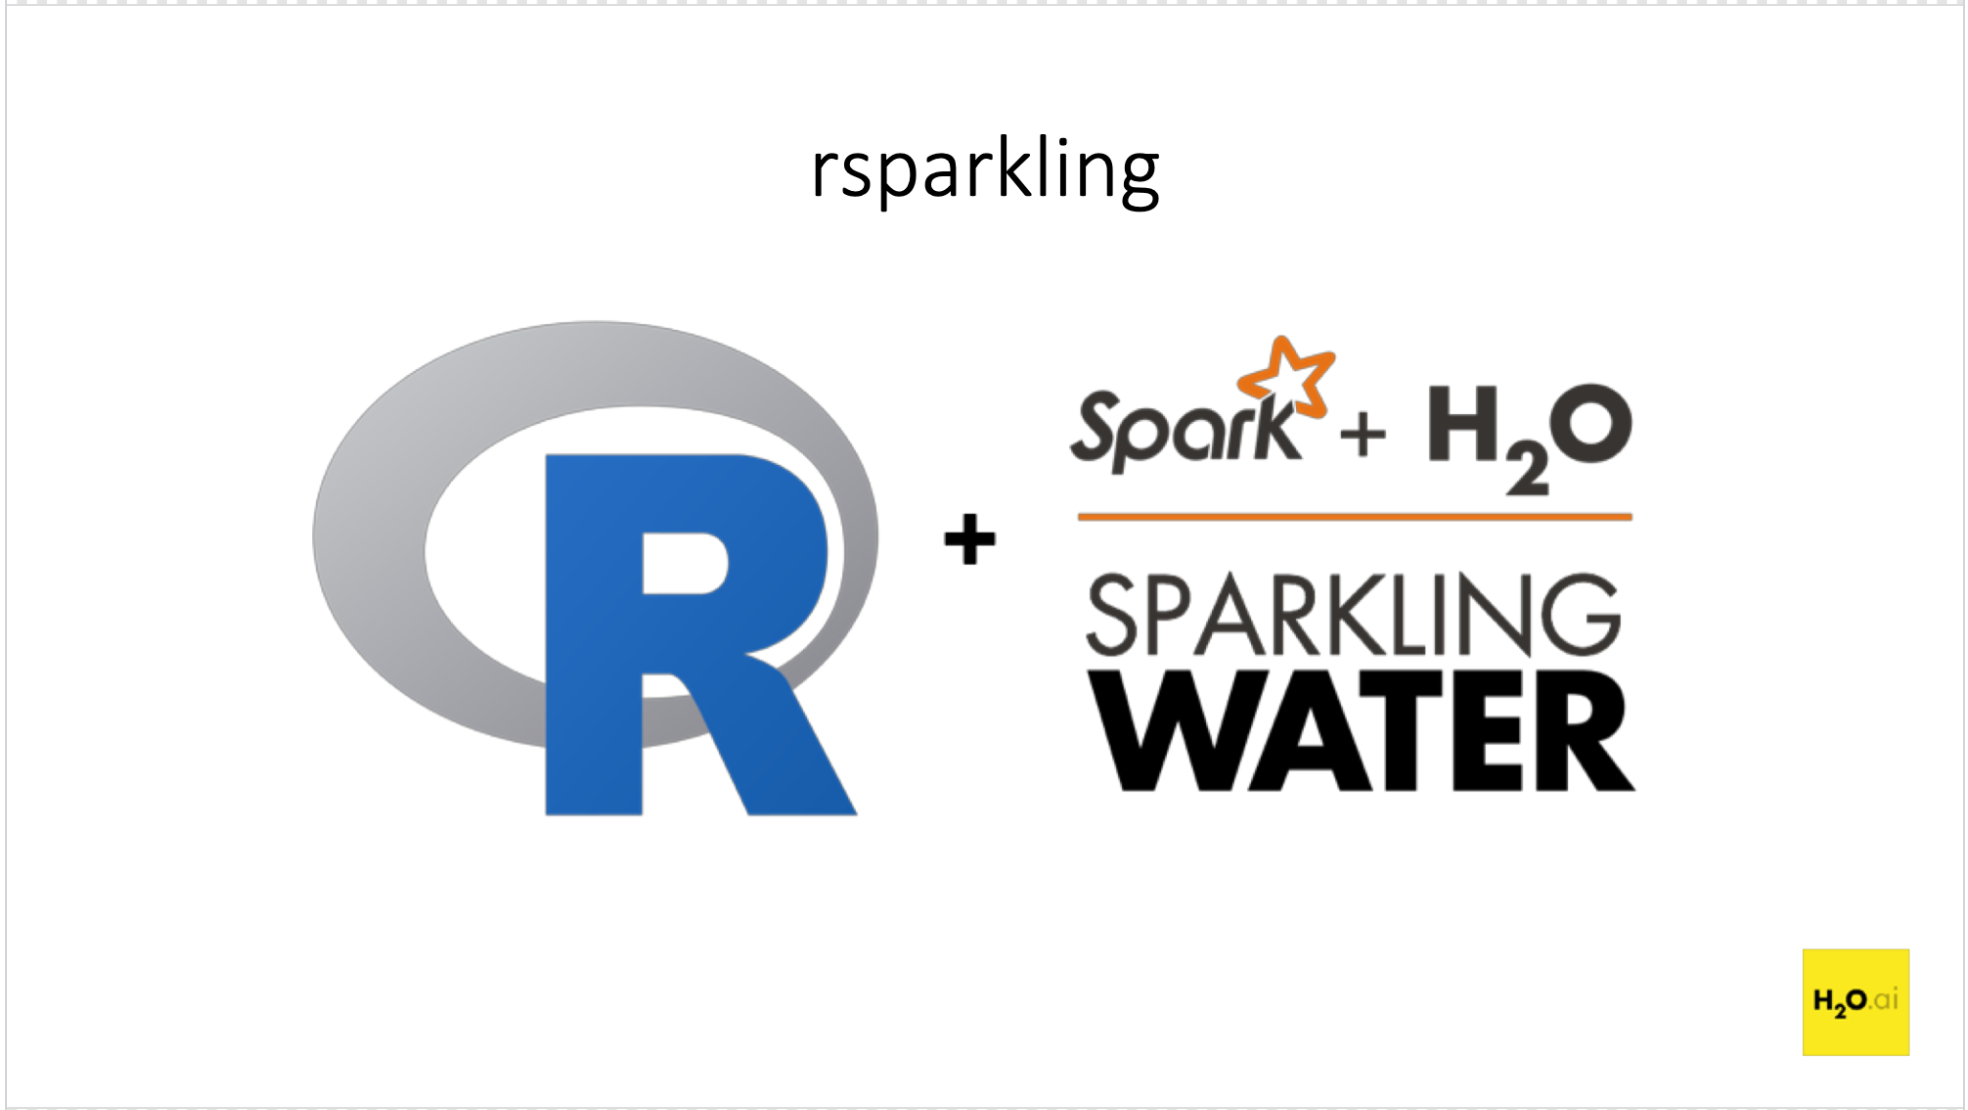 H2O Sparkling Water, R, RSparkling